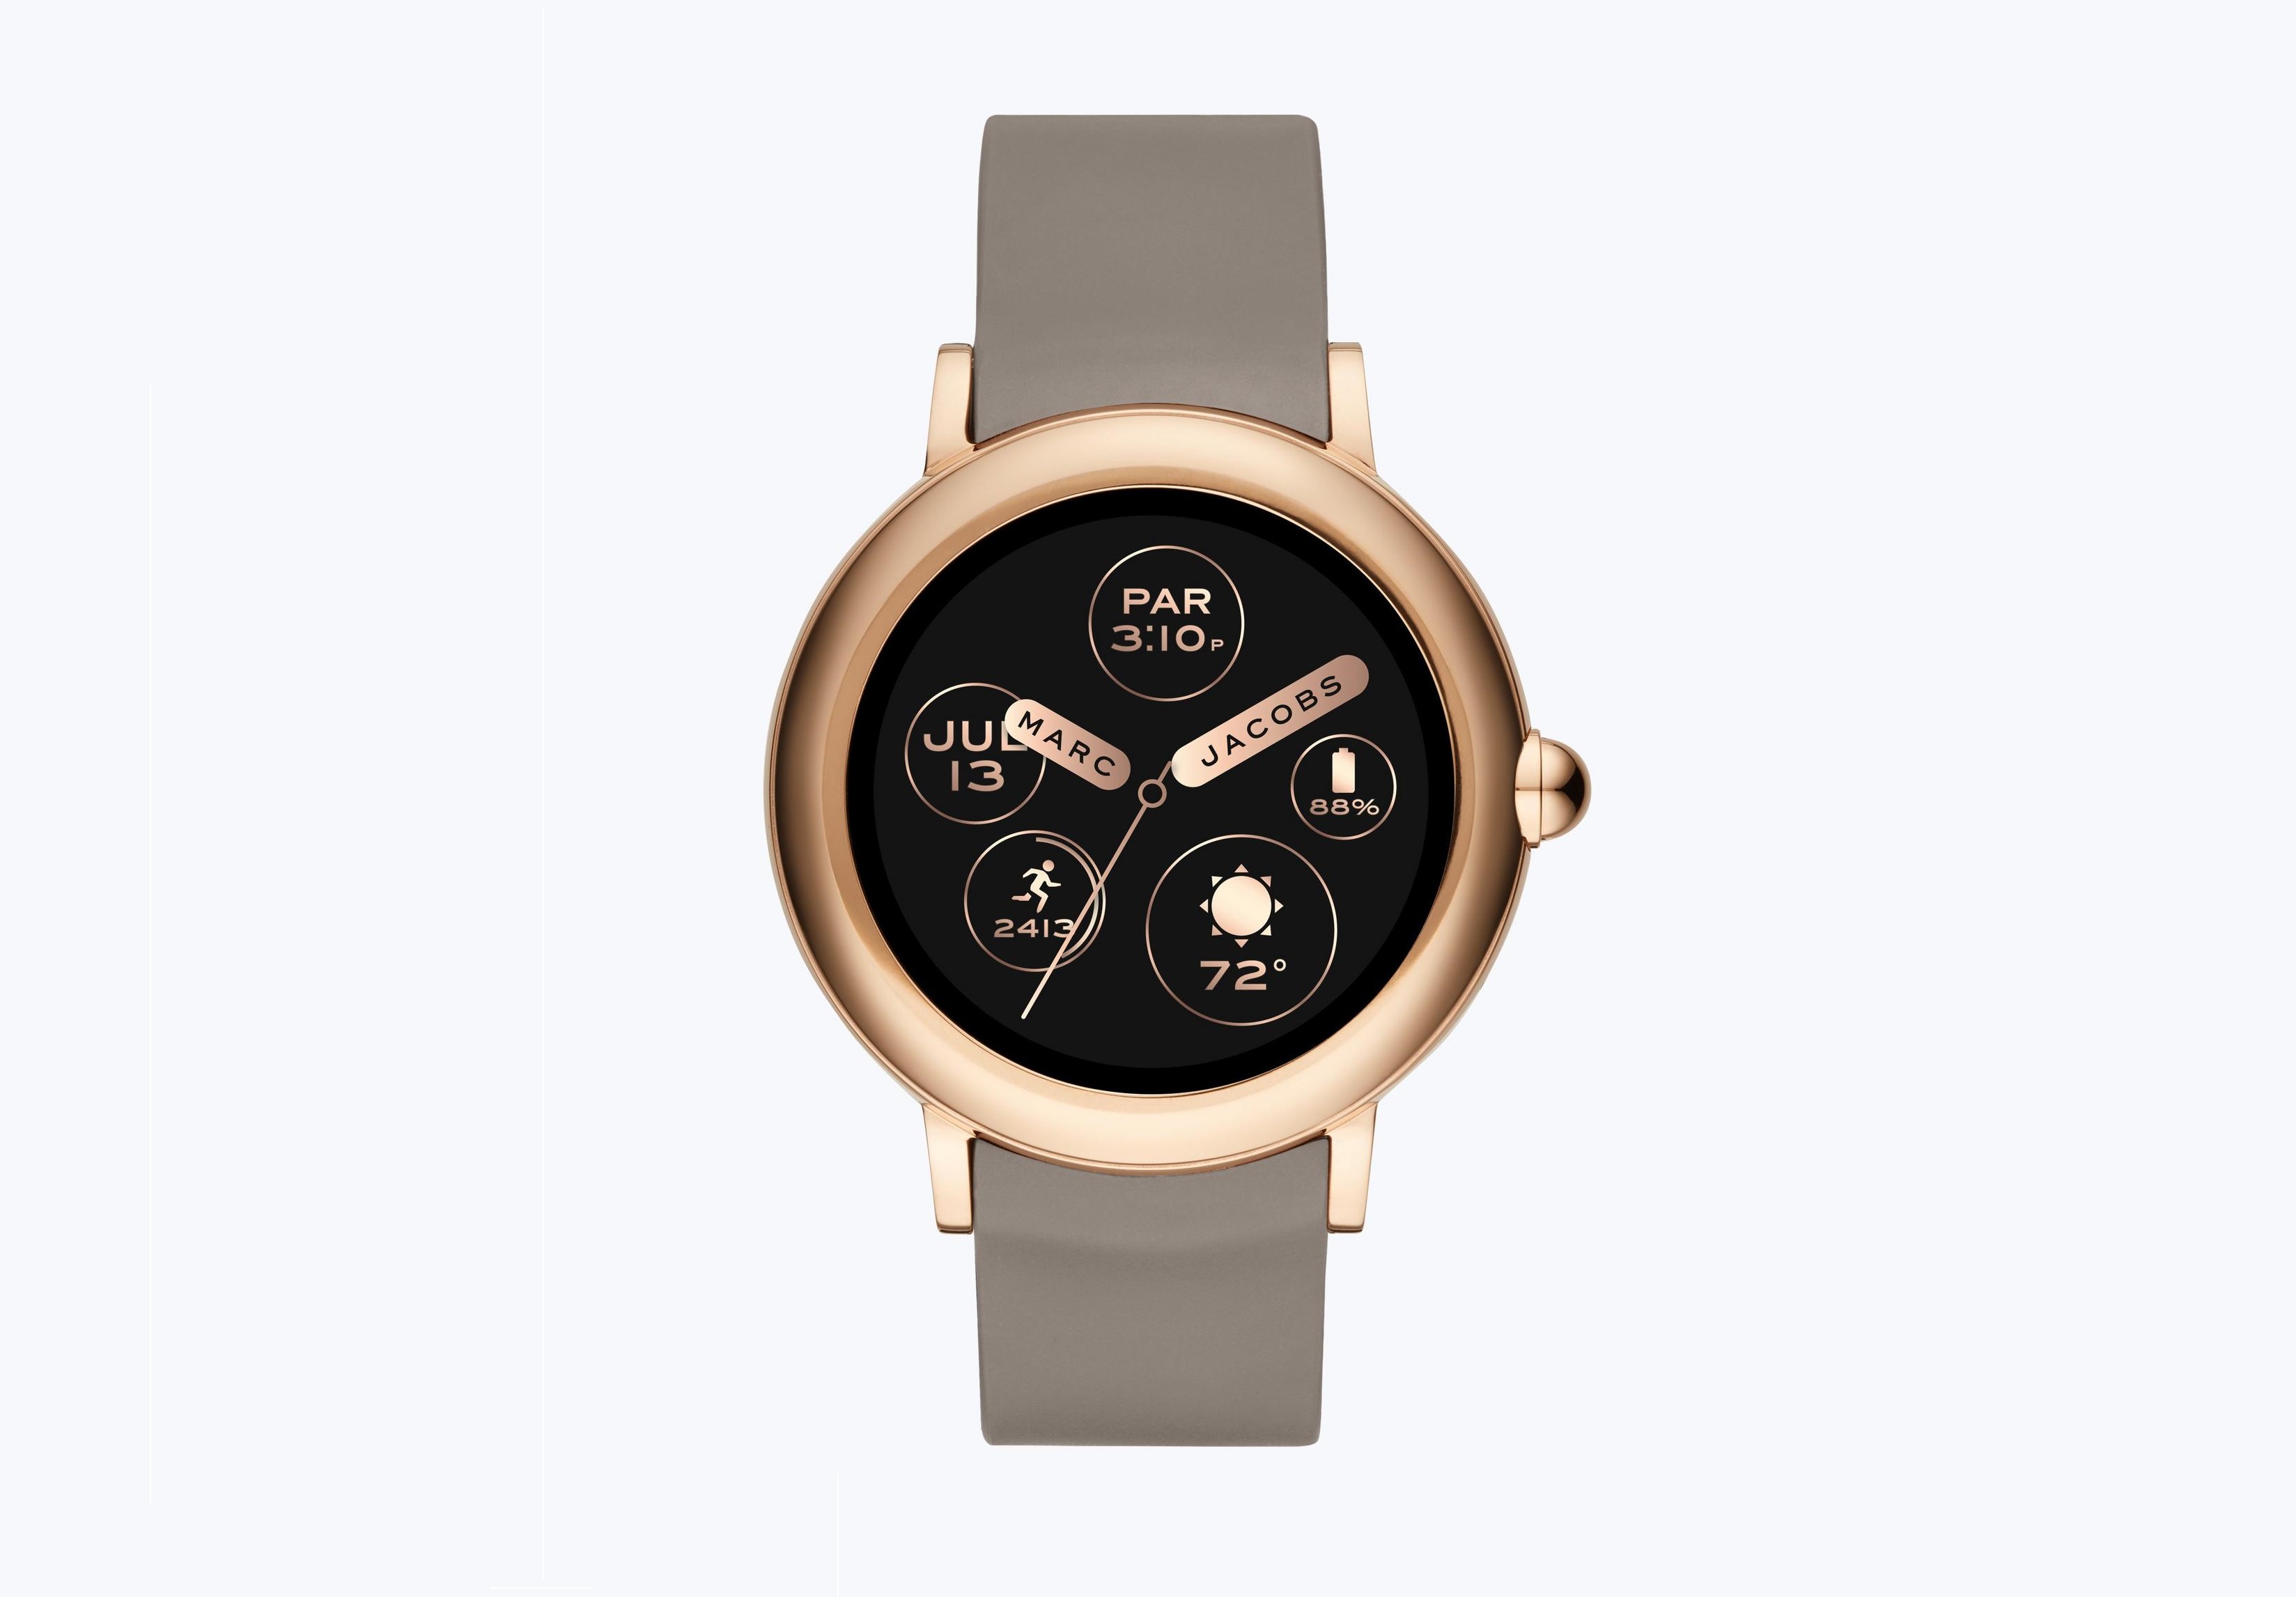 Marc Jacobs Riley smartwatch render from the front.